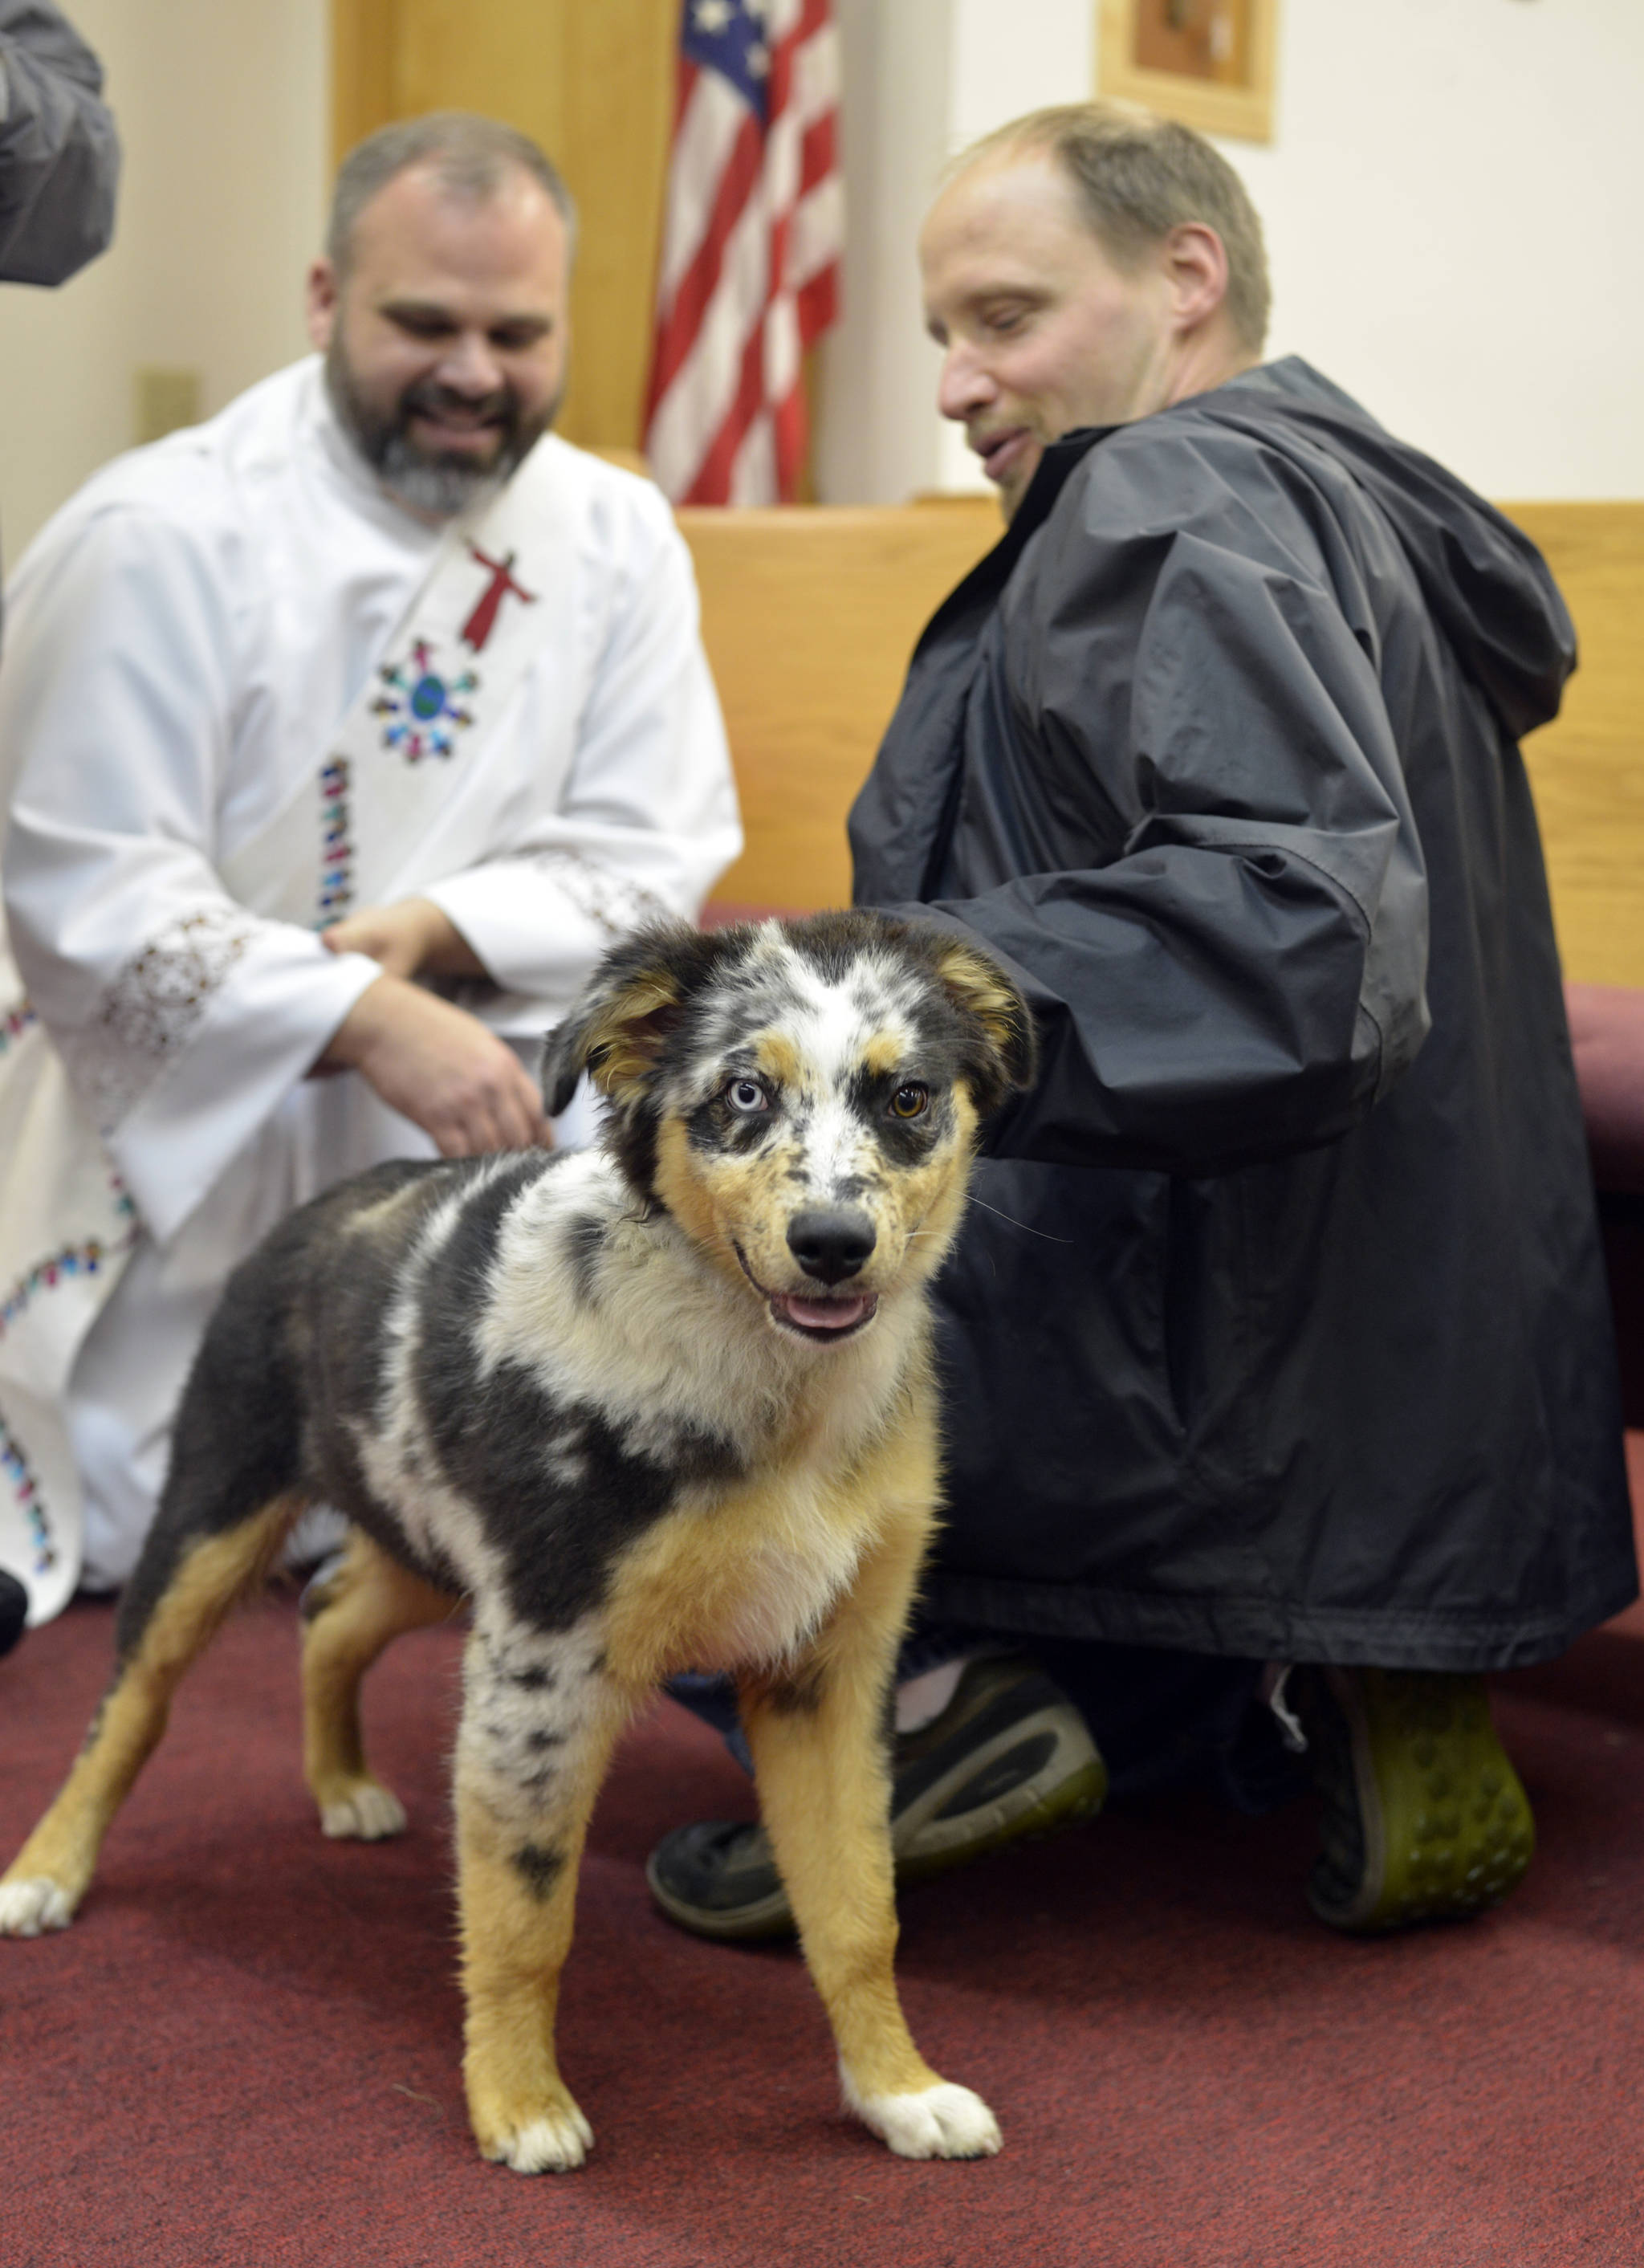 Deacon Kevin Woodvine of Our Lady of Angels Church in Kenai blesses Max the Australian shepherd while Max’s owner Jon Wolhlers tries to keep the puppy still at St. Francis by the Sea in Kenai, Alaska on Sunday, October 8, 2017 during the Blessing of the Animals. (Photo by Kat Sorensen/Peninsula Clarion)